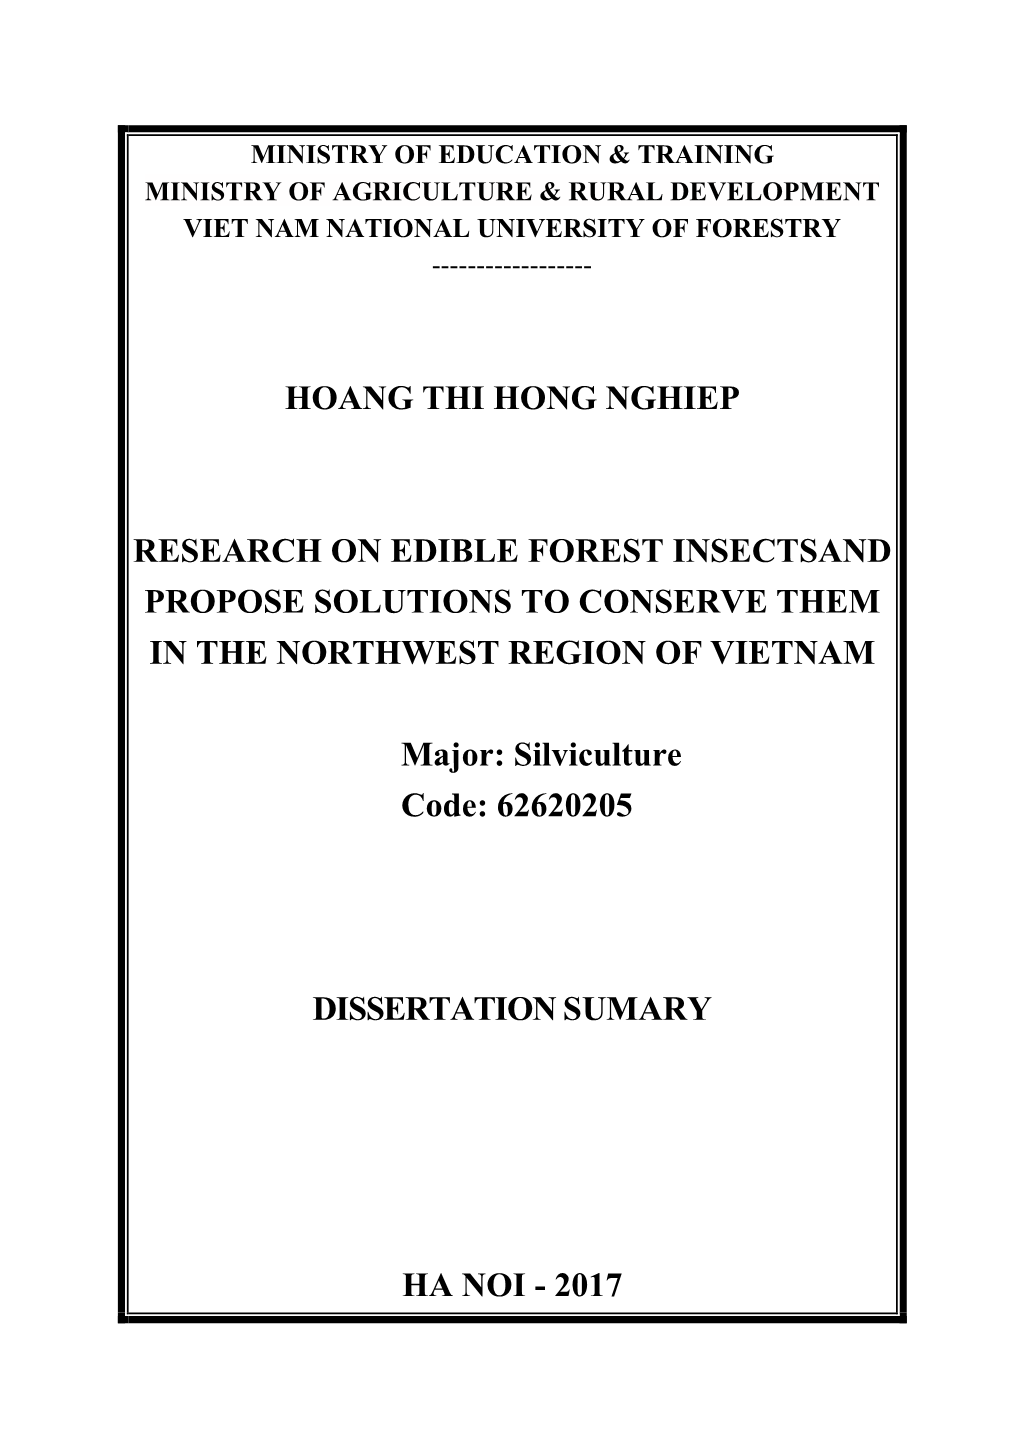 Hoang Thi Hong Nghiep Research on Edible Forest